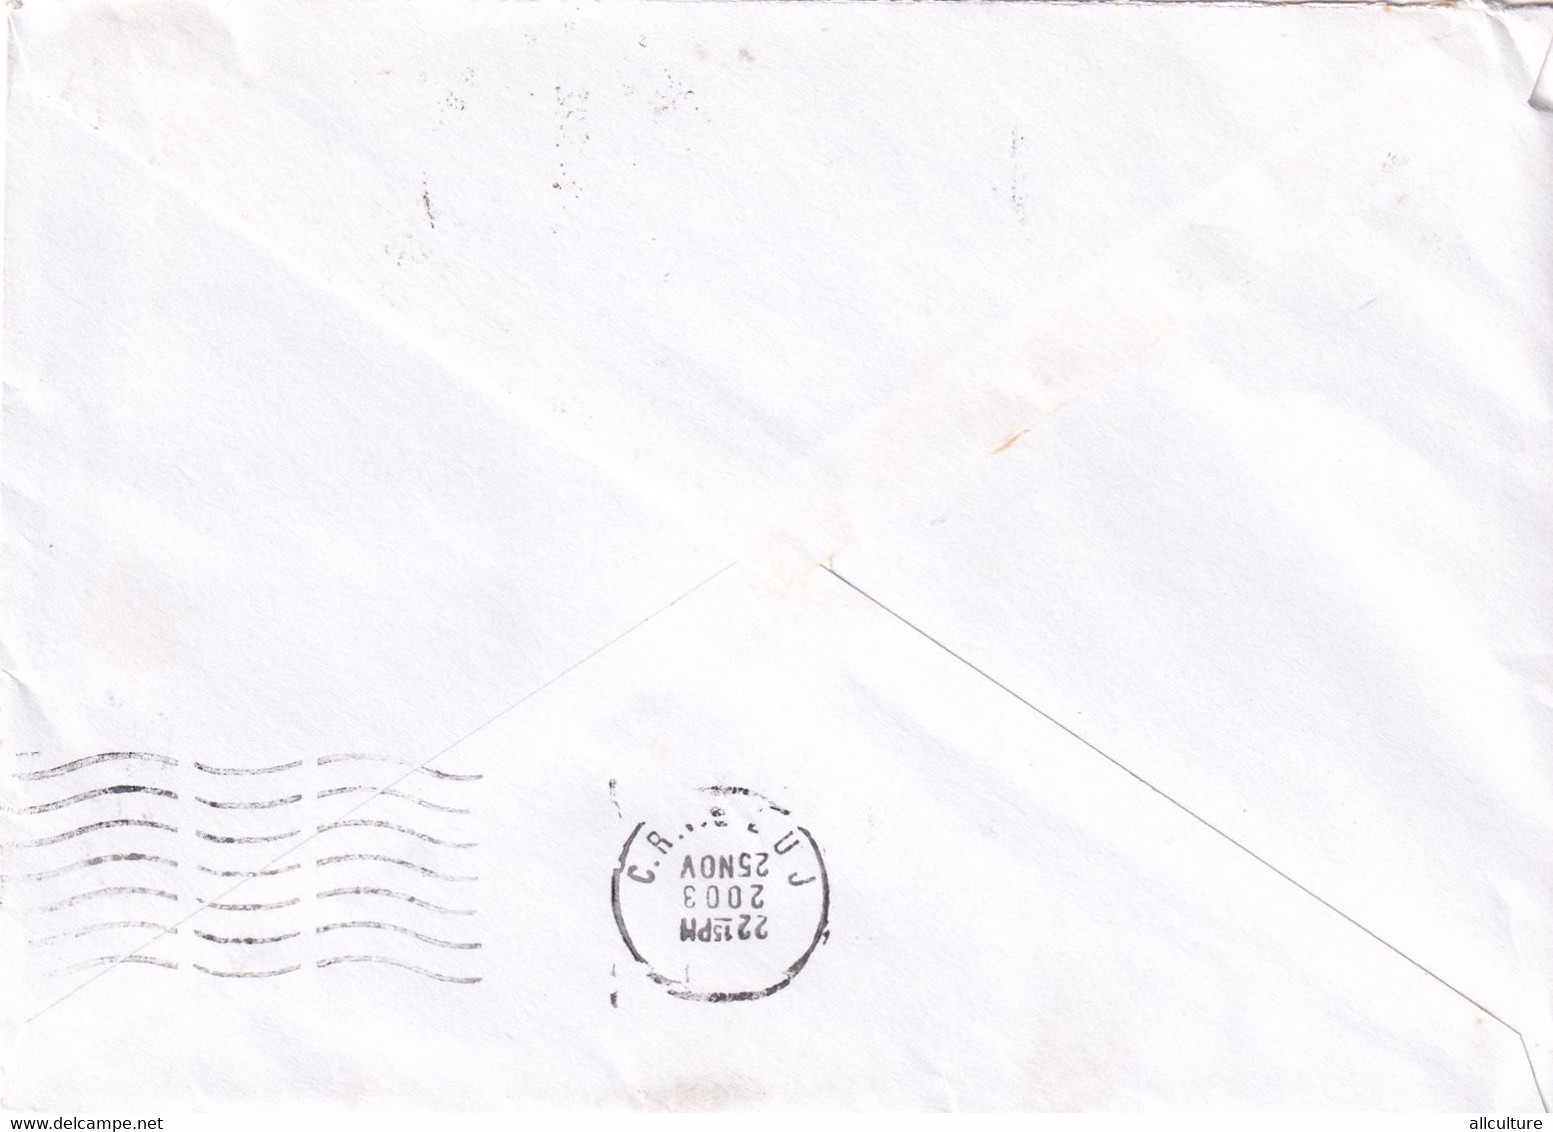 A9424-  LETTER FROM LUGOJ 2003 ROMANIA USED STAMP ON COVER ROMANIAN POSTAGE SENT TO CLUJ NAPOCA - Briefe U. Dokumente